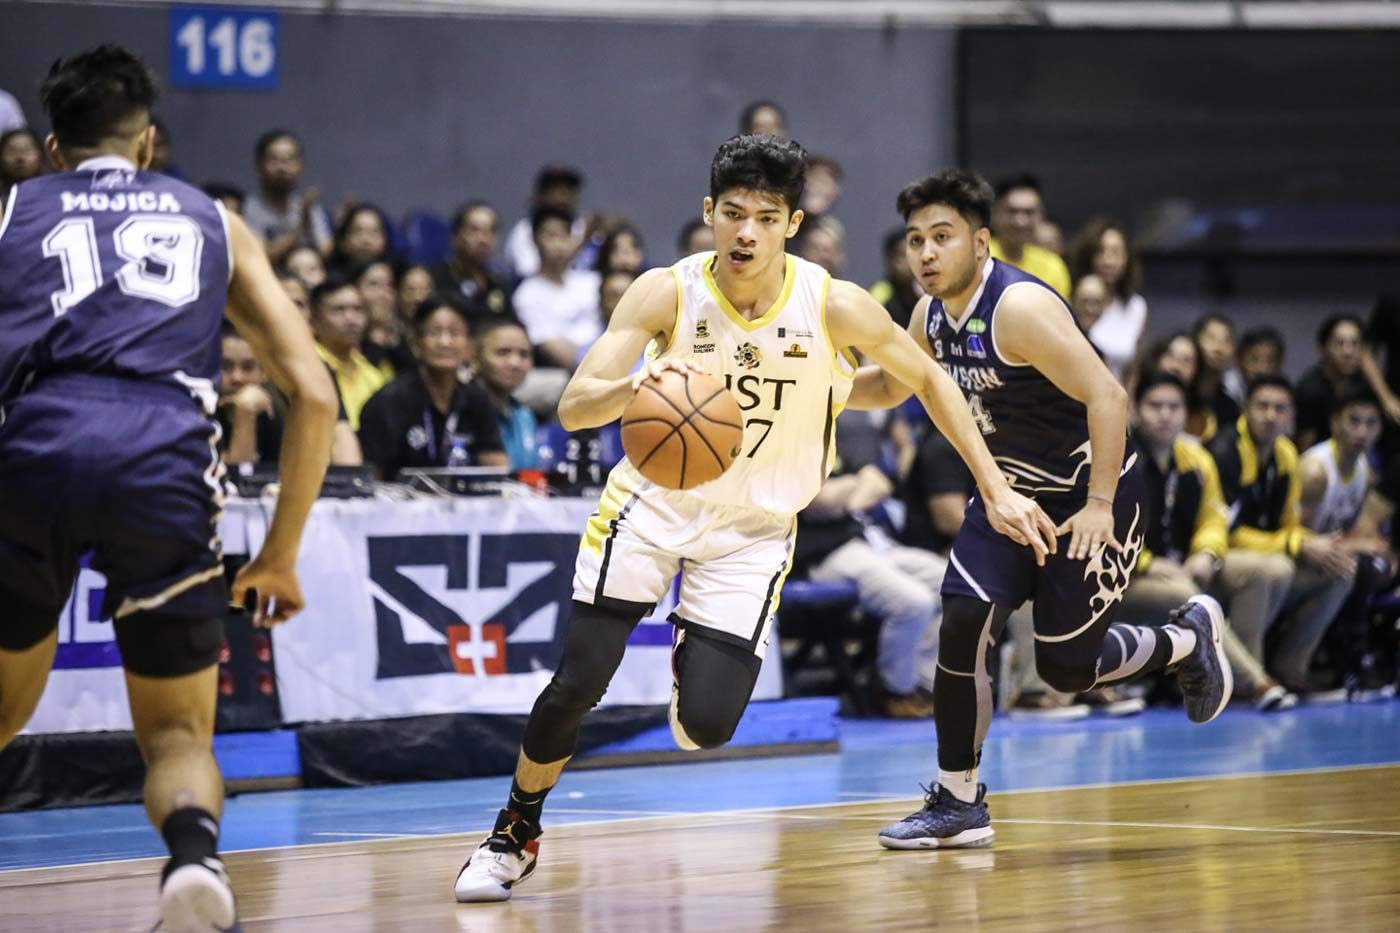 CJ Cansino fights through pain for Final Four hopeful UST